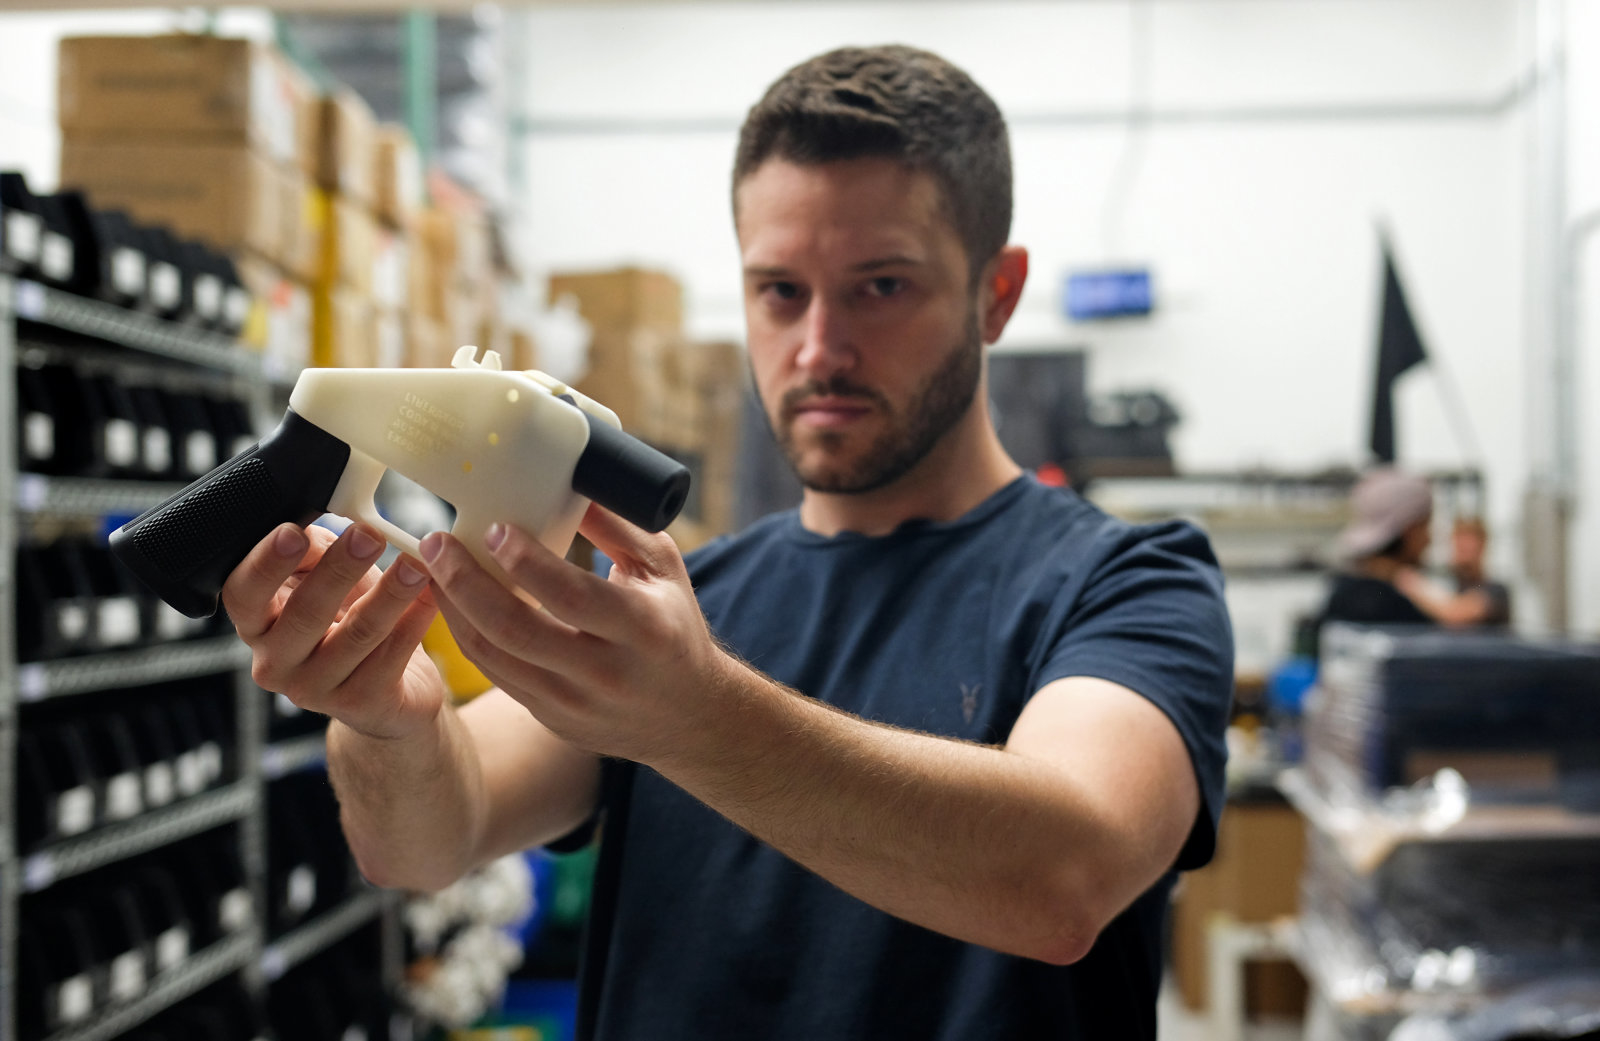 TOPSHOT - Cody Wilson, owner of Defense Distributed company, holds a 3D printed gun, called the "Liberator", in his factory in Austin, Texas on August 1, 2018. - The US "crypto-anarchist" who caused panic this week by publishing online blueprints for 3D-printed firearms said Wednesday that whatever the outcome of a legal battle, he has already succeeded in his political goal of spreading the designs far and wide. A federal court judge blocked Texan Cody Wilson's website on Tuesday, July 31, 2018, by issuing a temporary injunction. (Photo by Kelly WEST / AFP)        (Photo credit should read KELLY WEST/AFP/Getty Images)